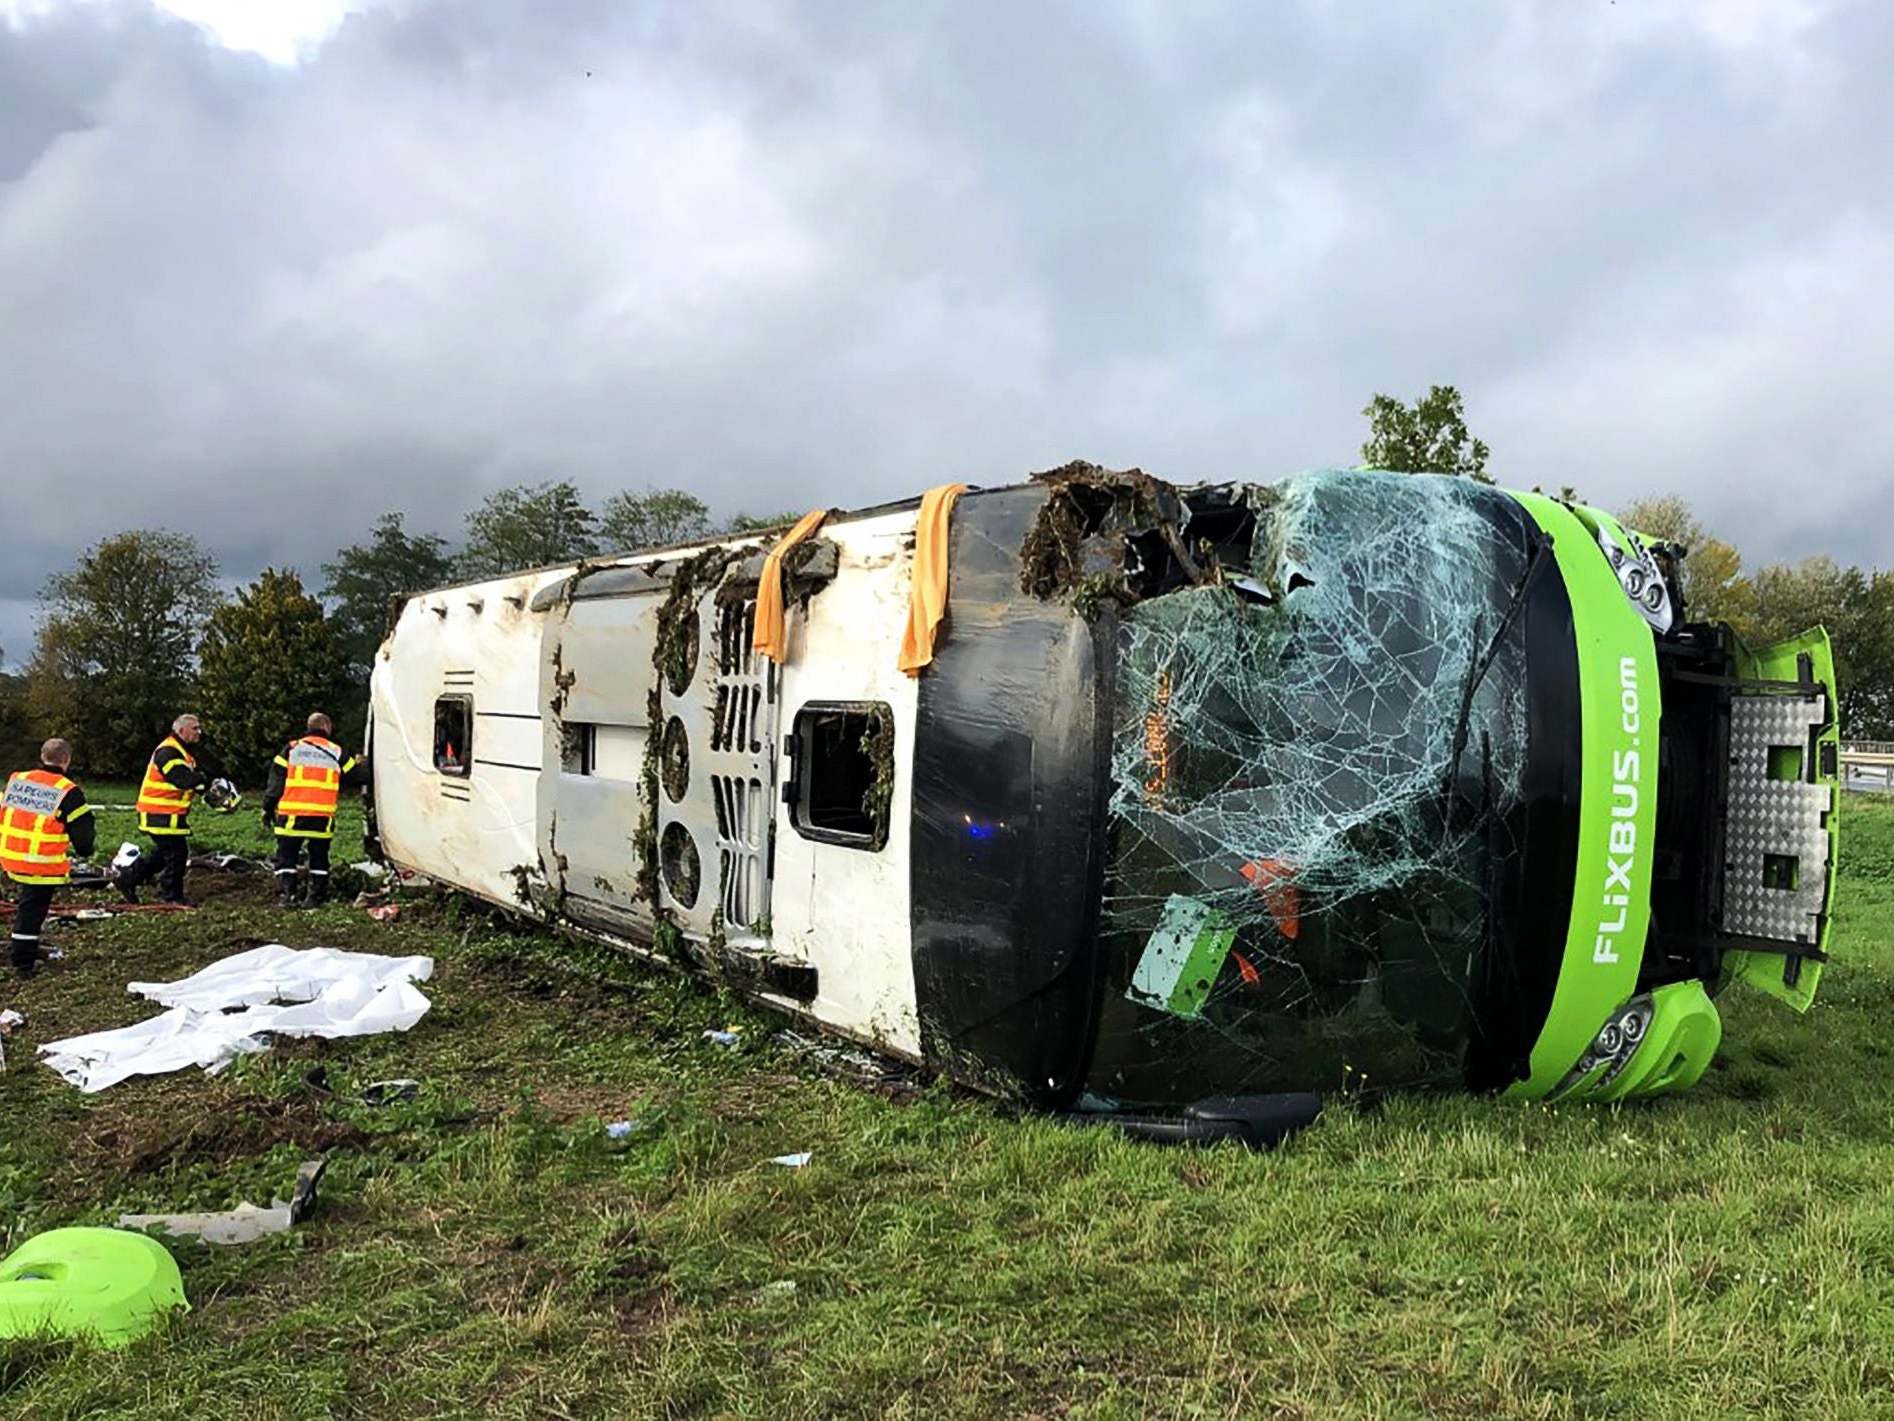 Four passengers were seriously injured in the accident on Sunday morning